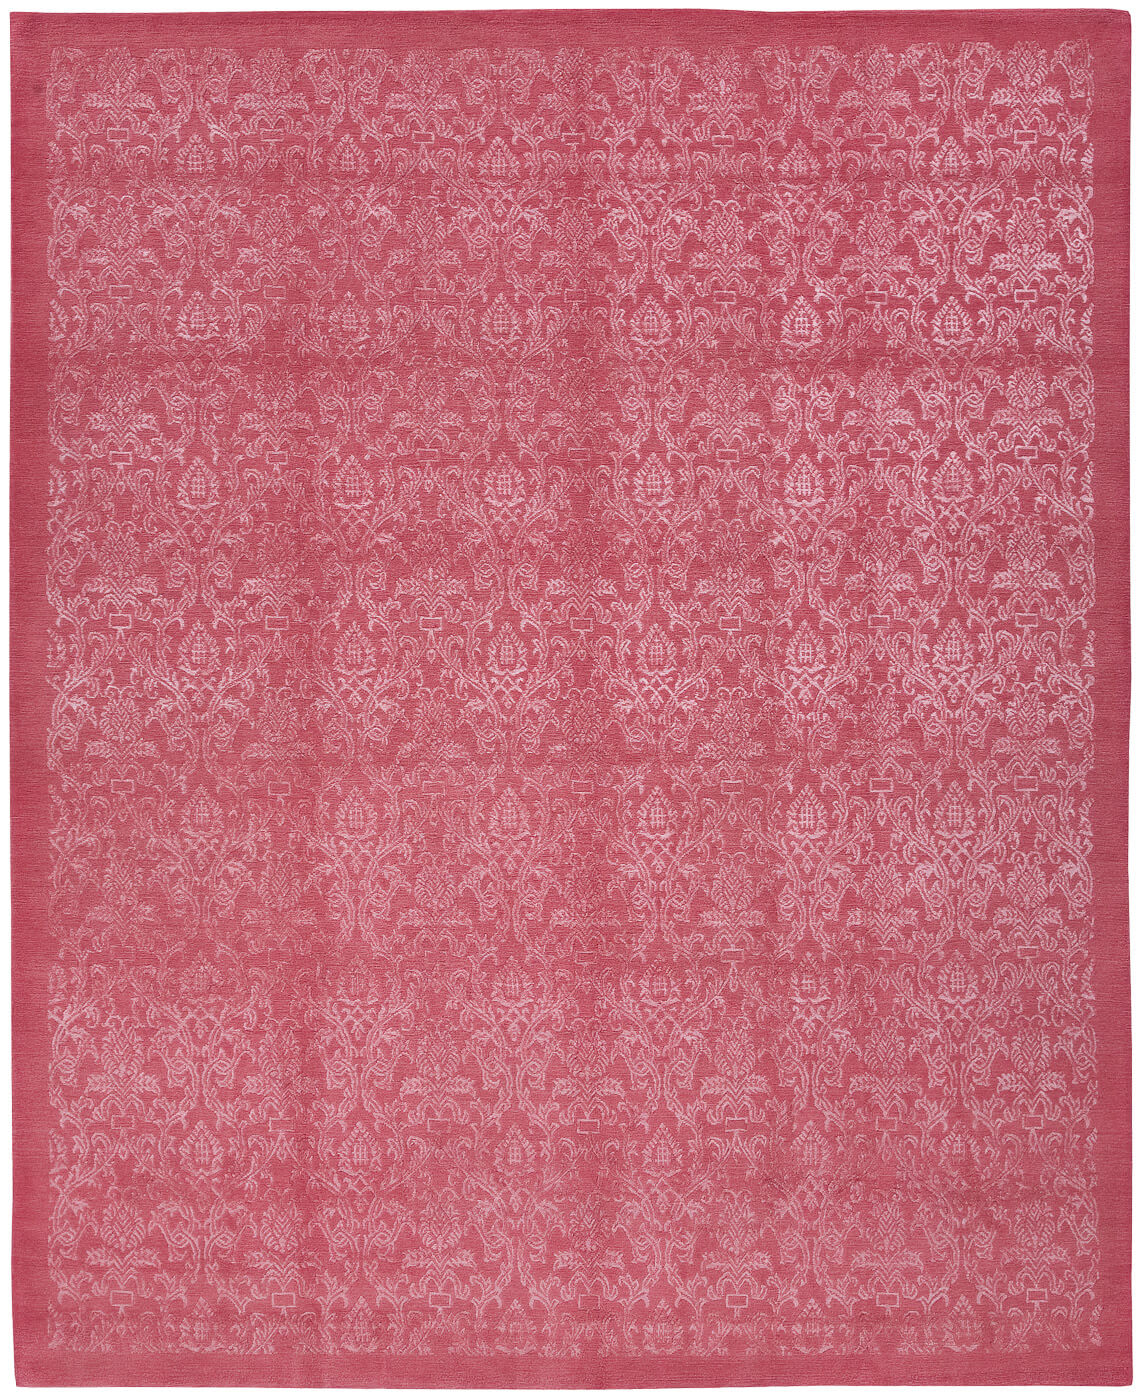 Roma Pink Luxury Hand-woven Rug ☞ Size: 250 x 300 cm